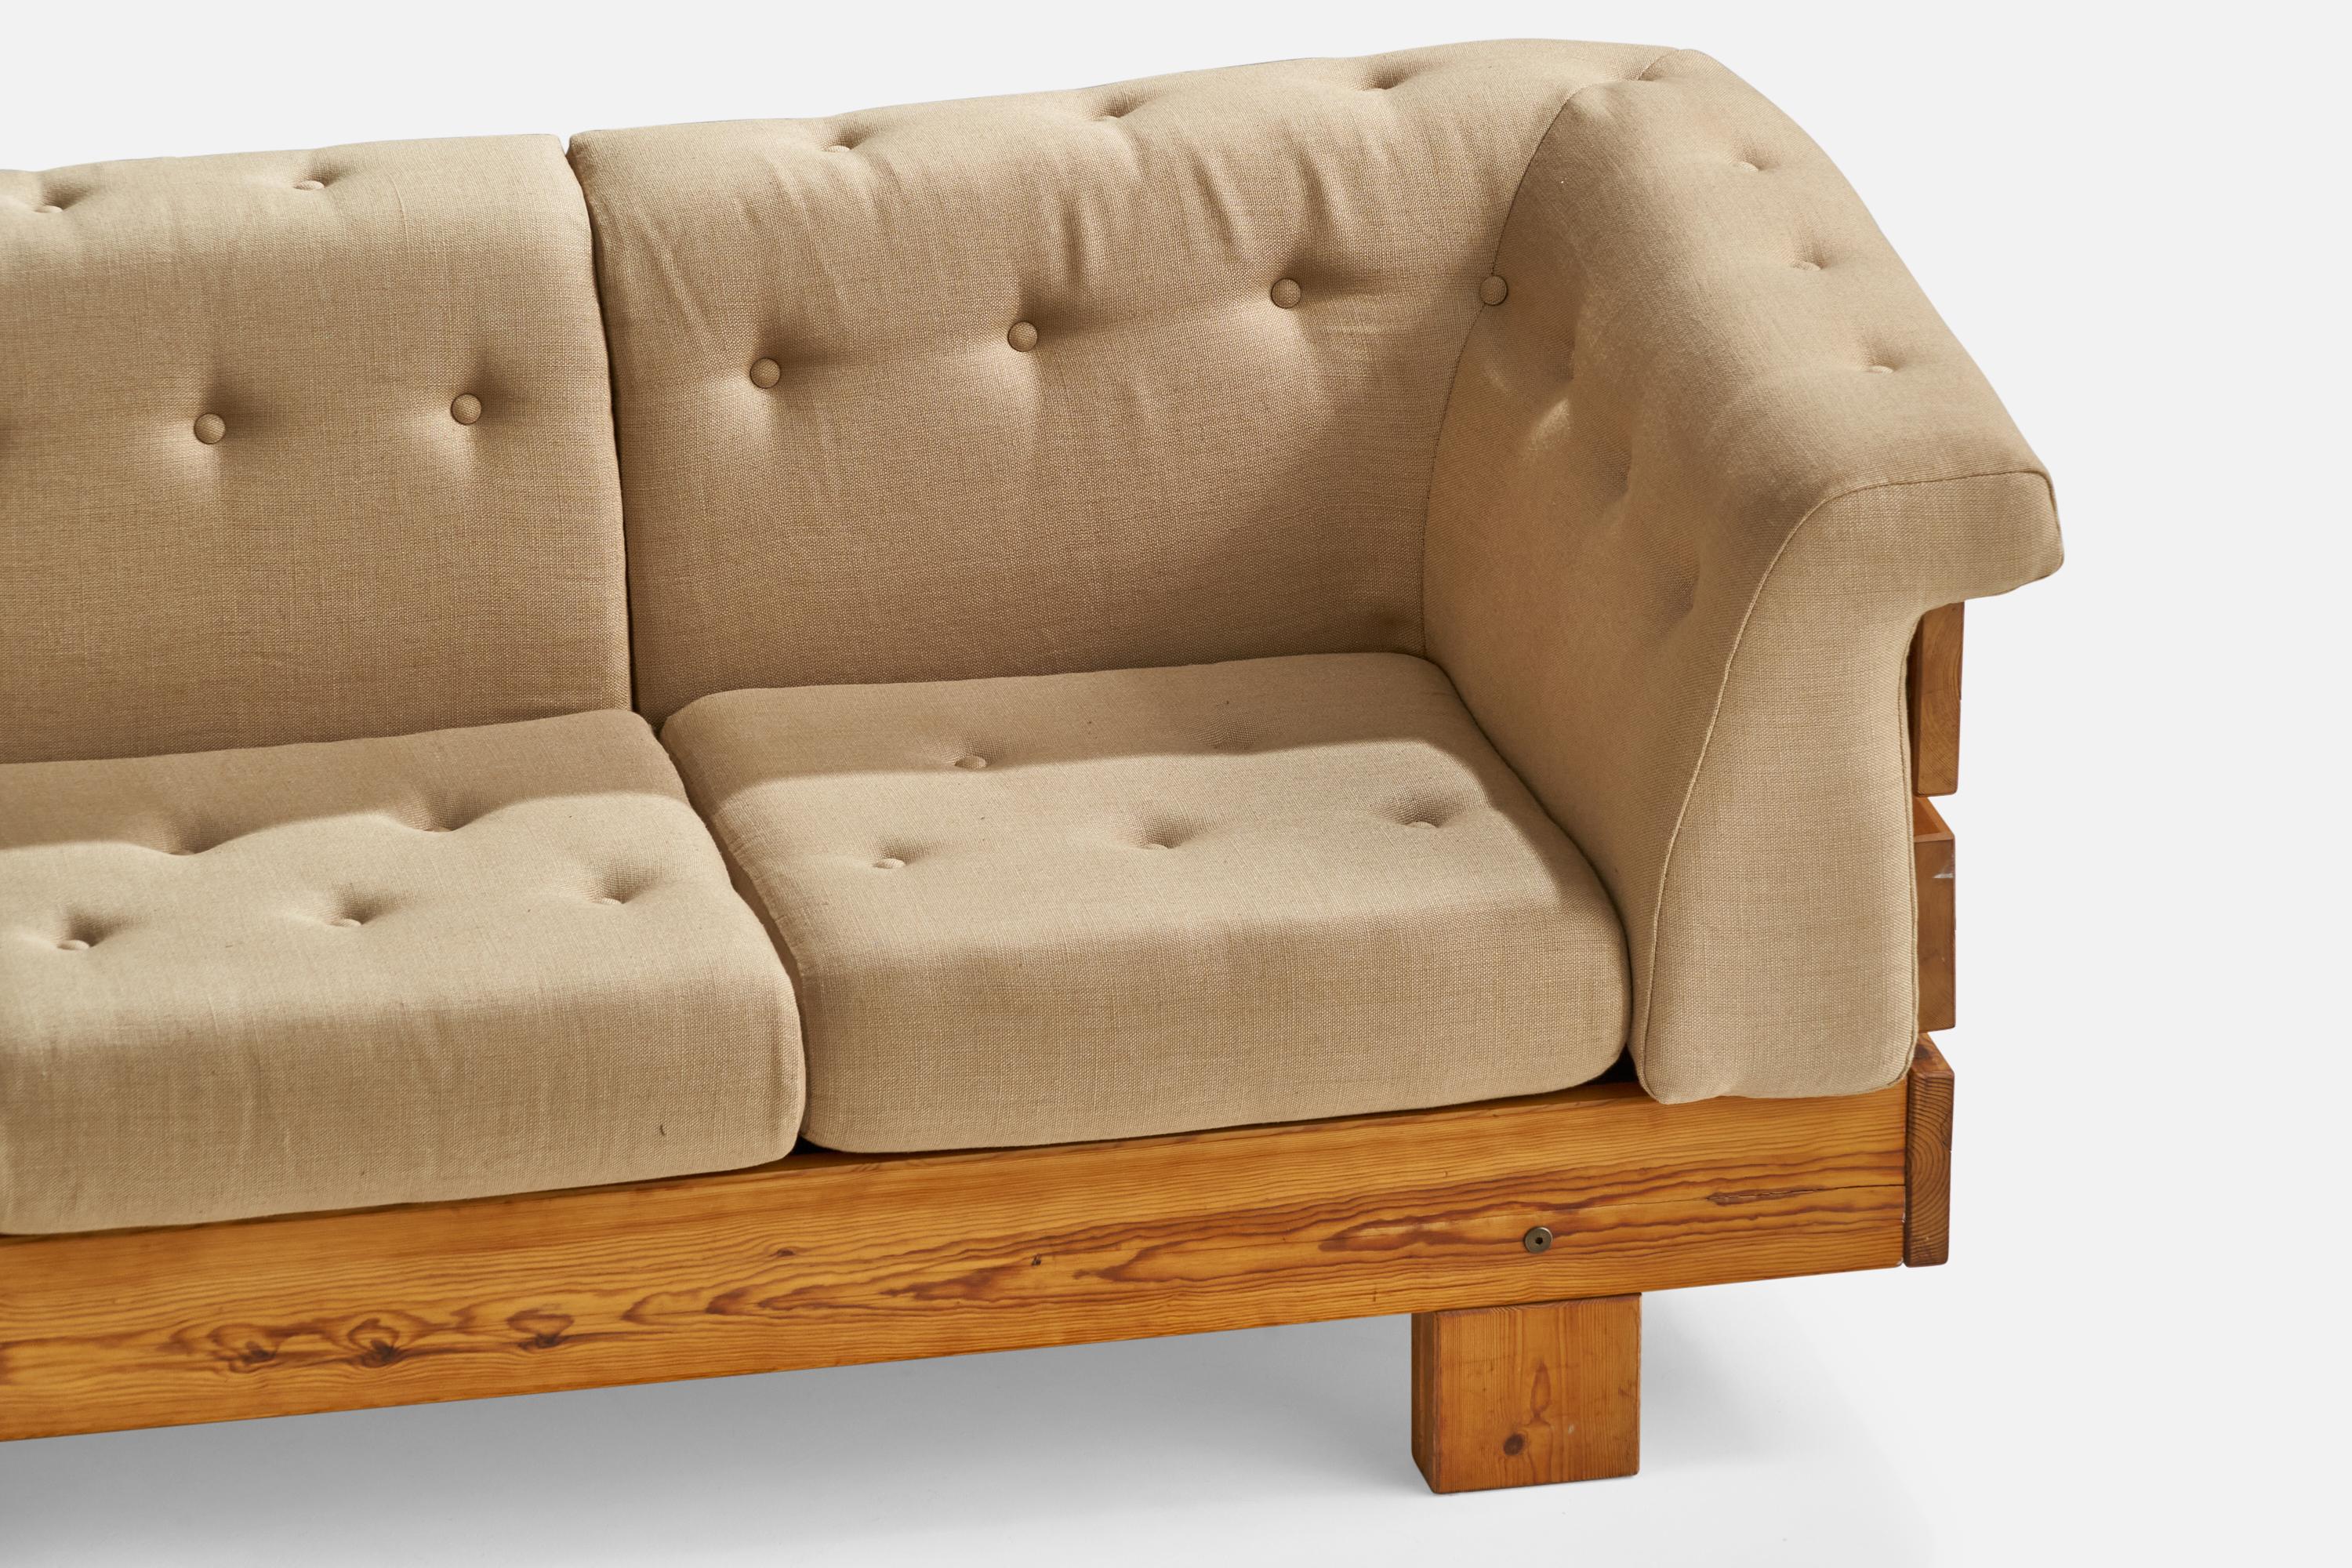 Late 20th Century Sven Larsson, Large Sectional Sofa, Pine, Fabric, Sweden, 1970s For Sale